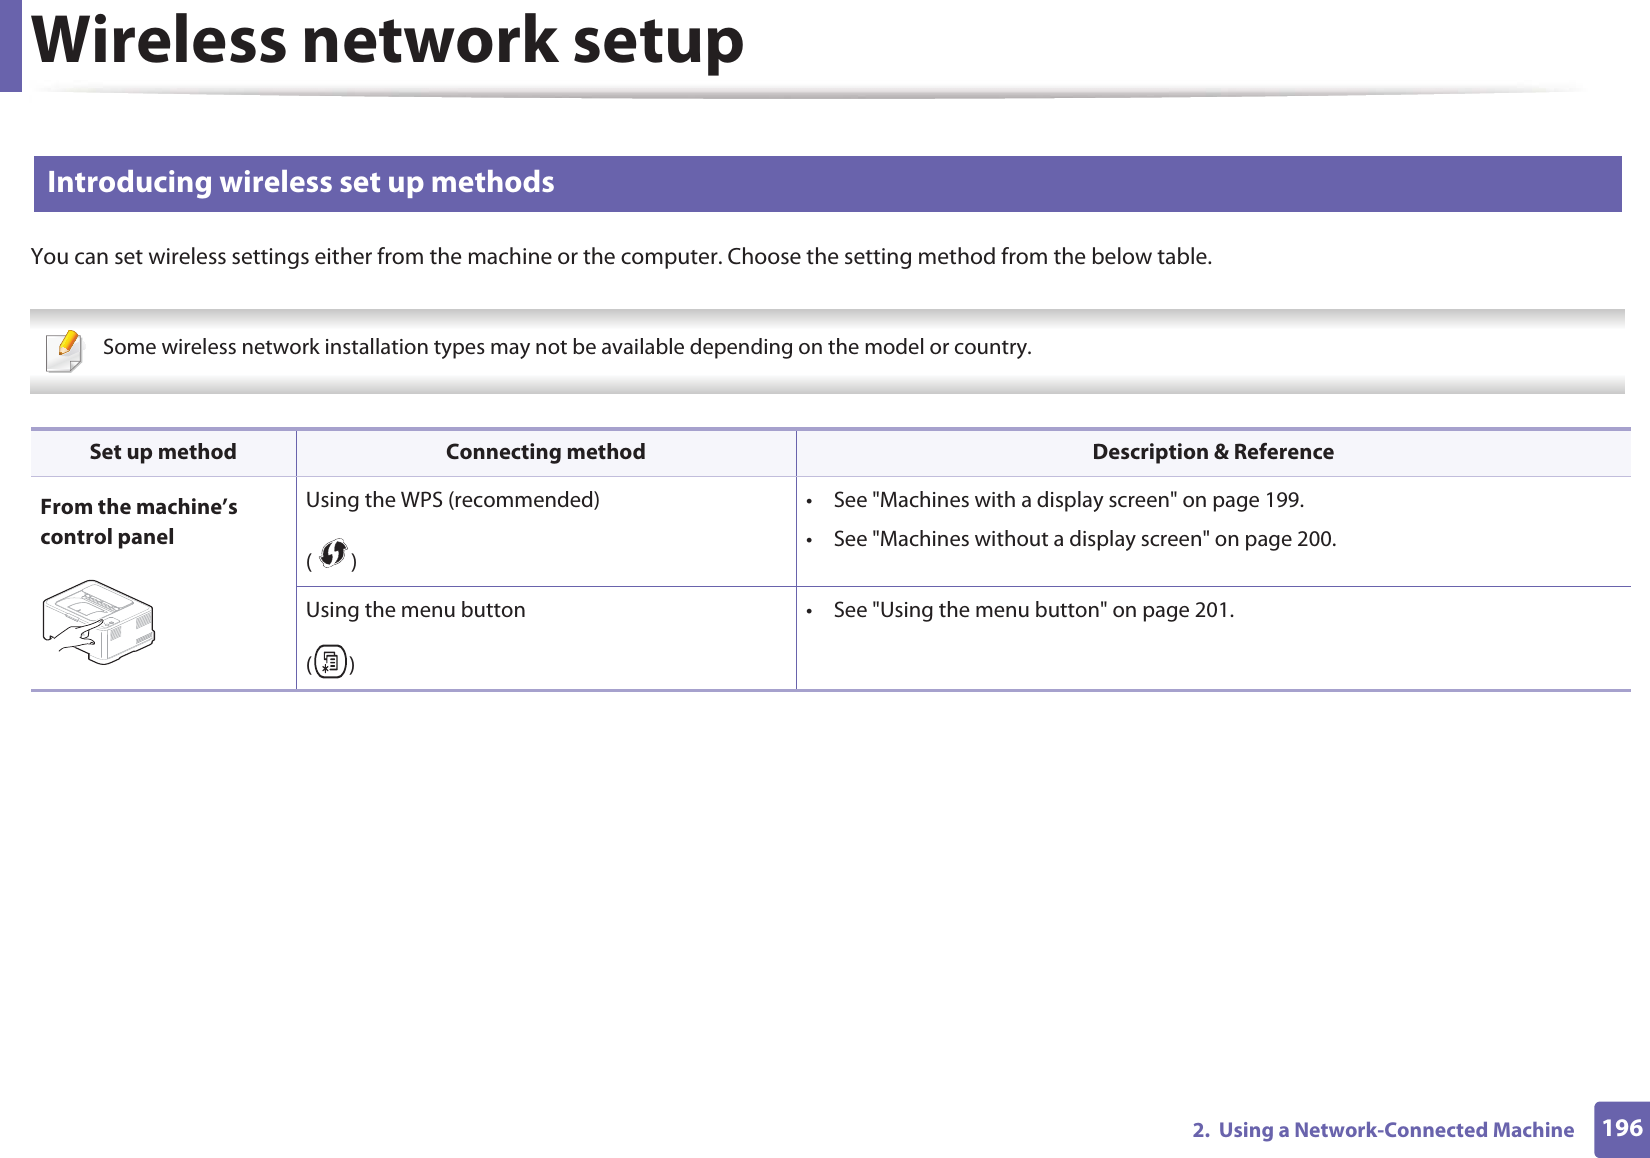 Wireless network setup1962.  Using a Network-Connected Machine13 Introducing wireless set up methodsYou can set wireless settings either from the machine or the computer. Choose the setting method from the below table. Some wireless network installation types may not be available depending on the model or country.  Set up method Connecting method Description &amp; ReferenceFrom the machine’s control panelUsing the WPS (recommended)()• See &quot;Machines with a display screen&quot; on page 199.• See &quot;Machines without a display screen&quot; on page 200.Using the menu button()• See &quot;Using the menu button&quot; on page 201.